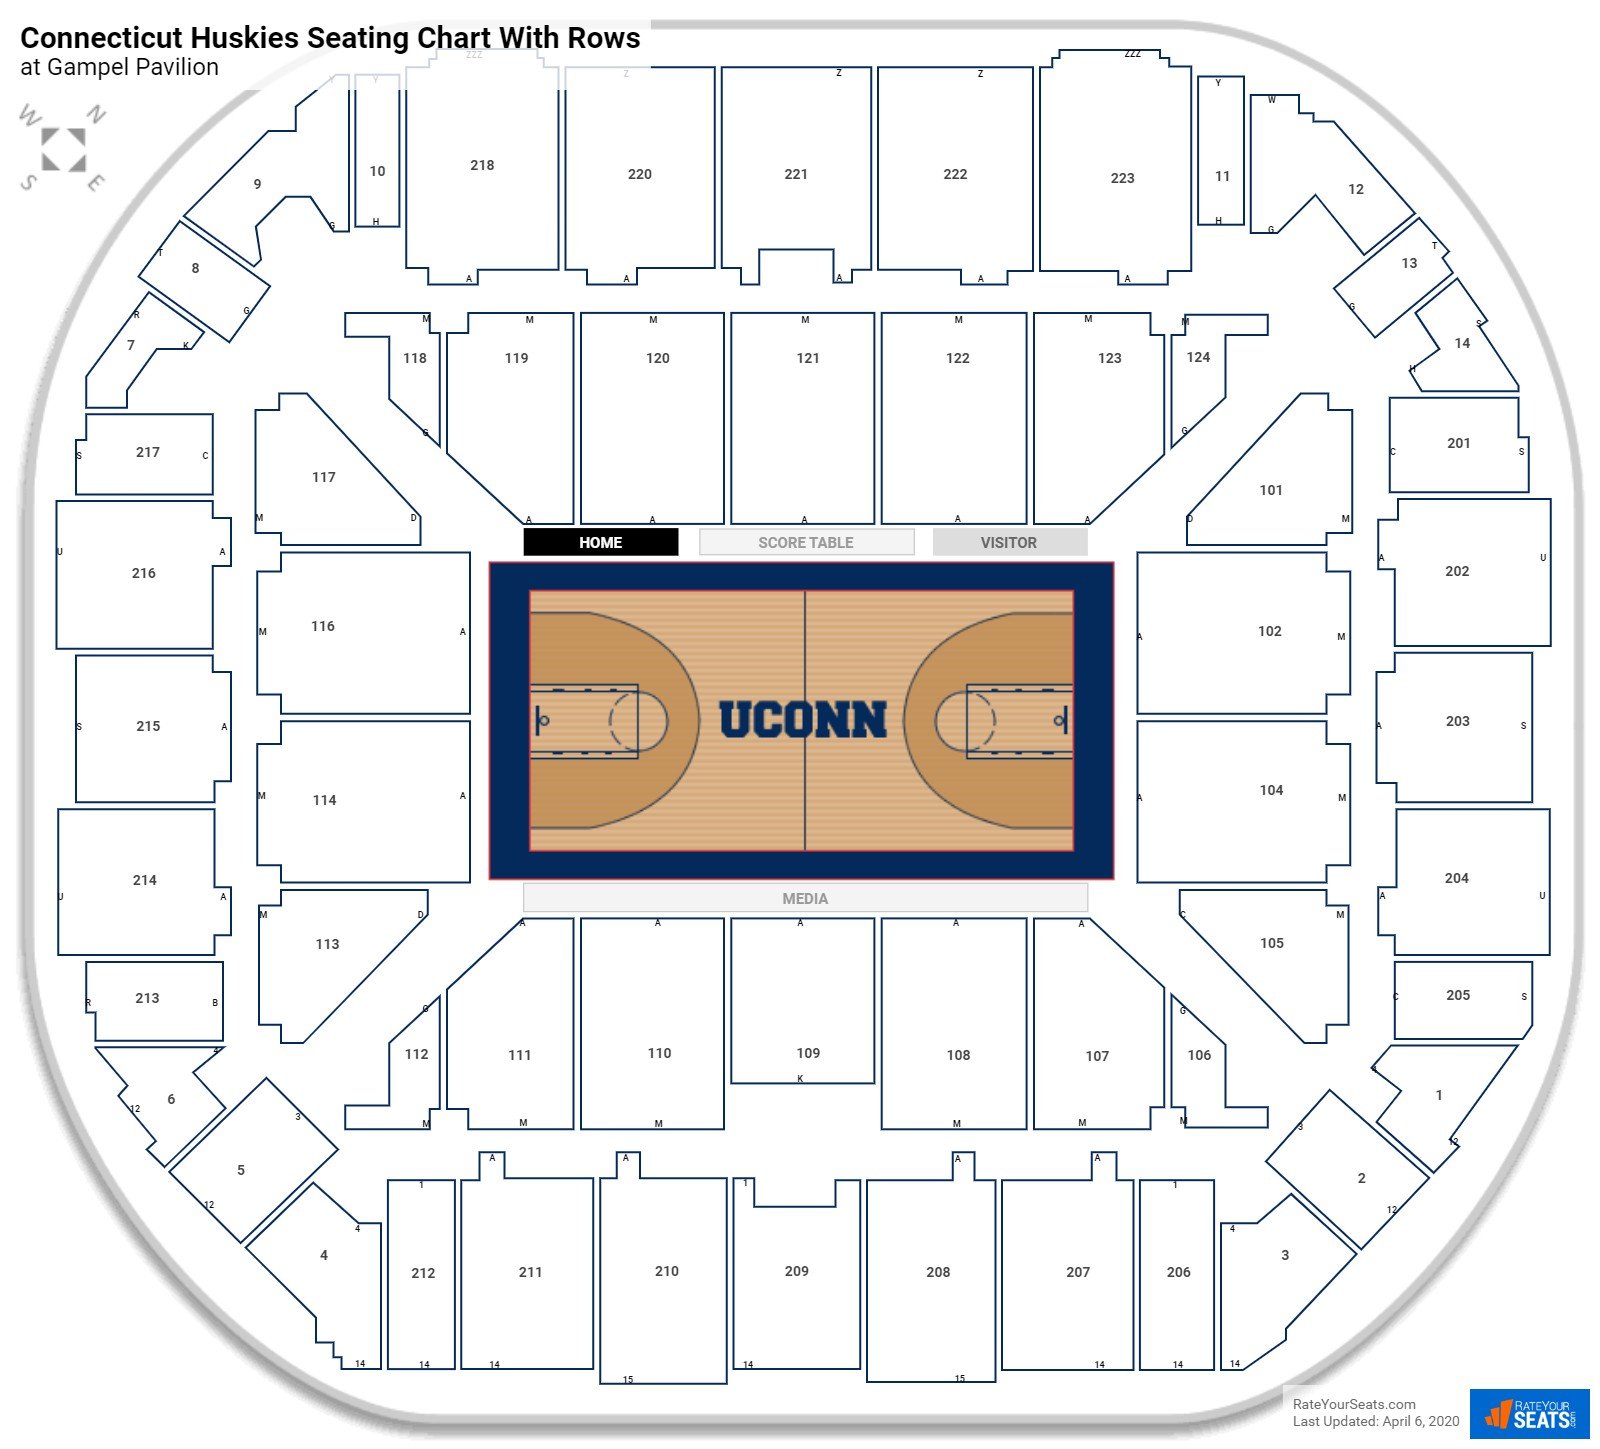 Gampel Pavilion seating chart with row numbers